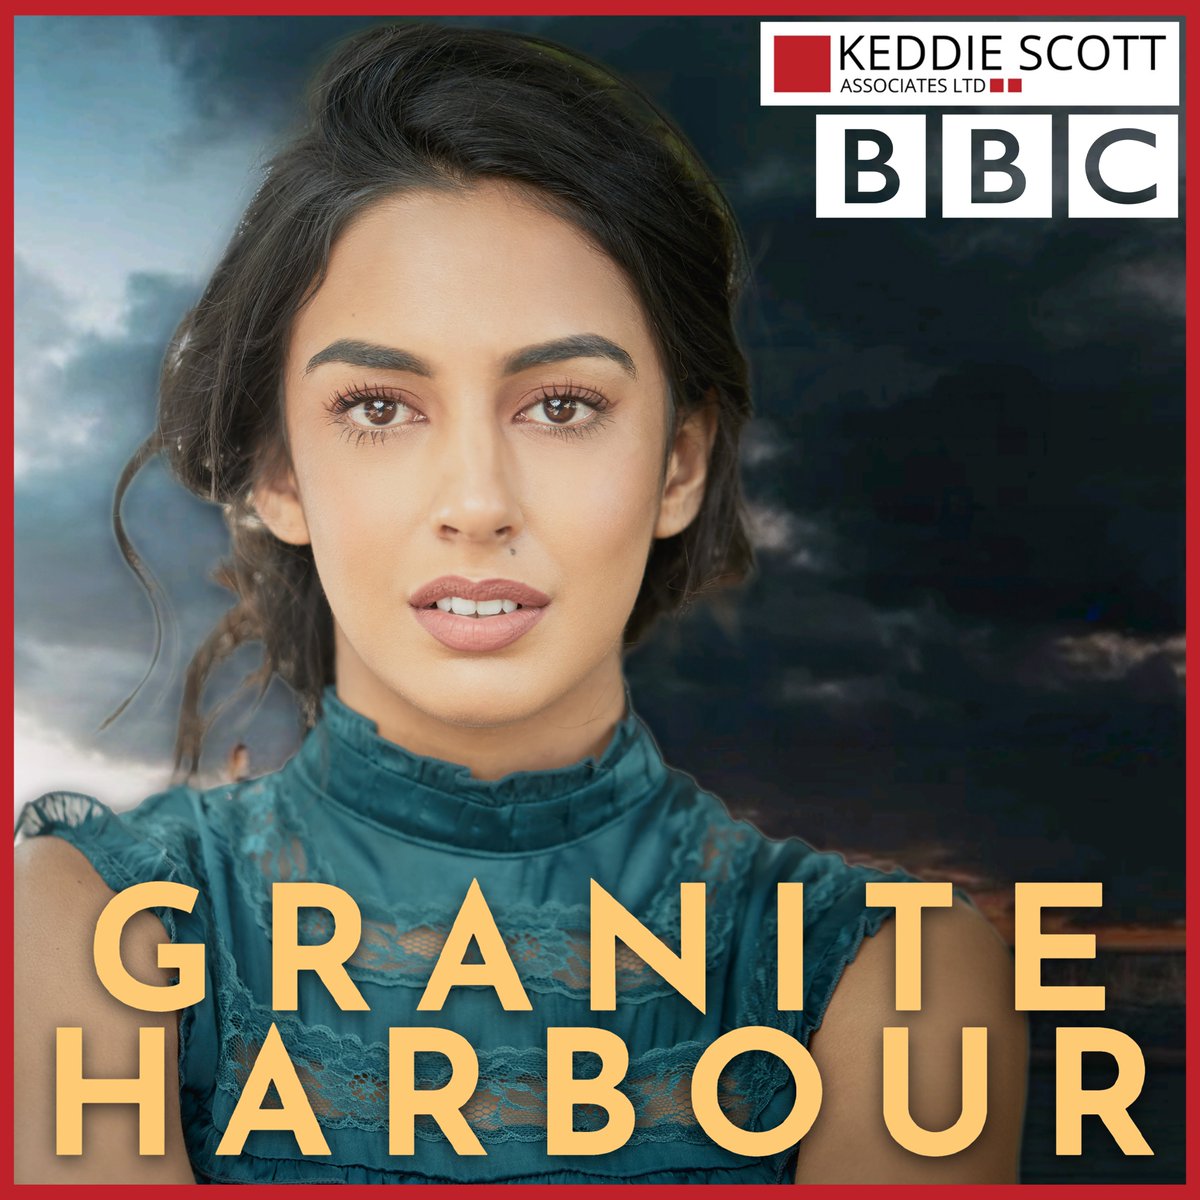 📺GRANITE HARBOUR returns to Aberdeen for a new three-part, second series. Streaming on @BBCiPlayer from today. ⭐️Our fabulous LAYLA KIRK (@LaylaKirk94) plays RUTH MCFADDEN. #SuperClients